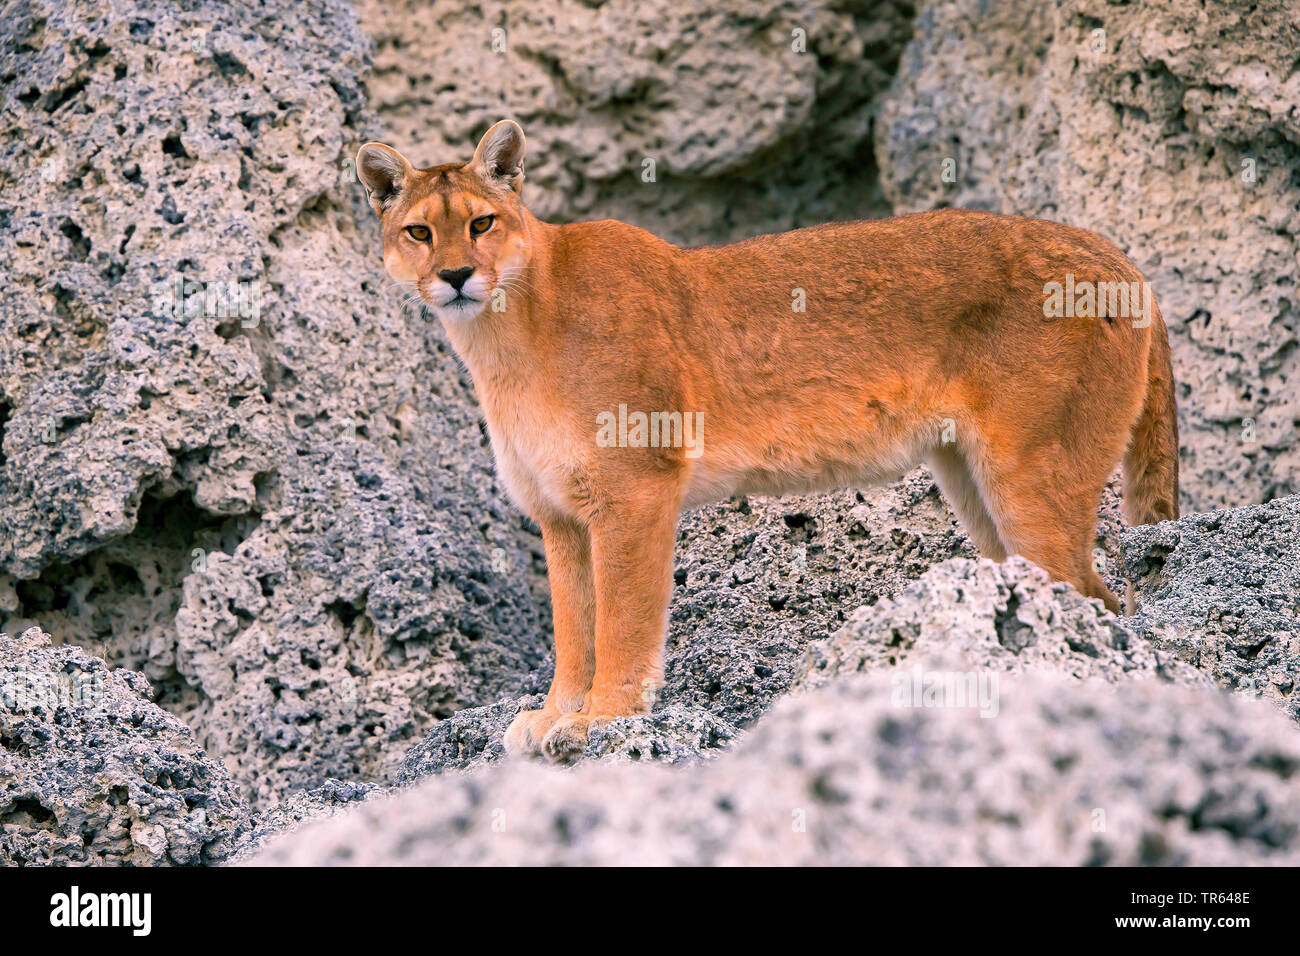 South American Cougar High Resolution 